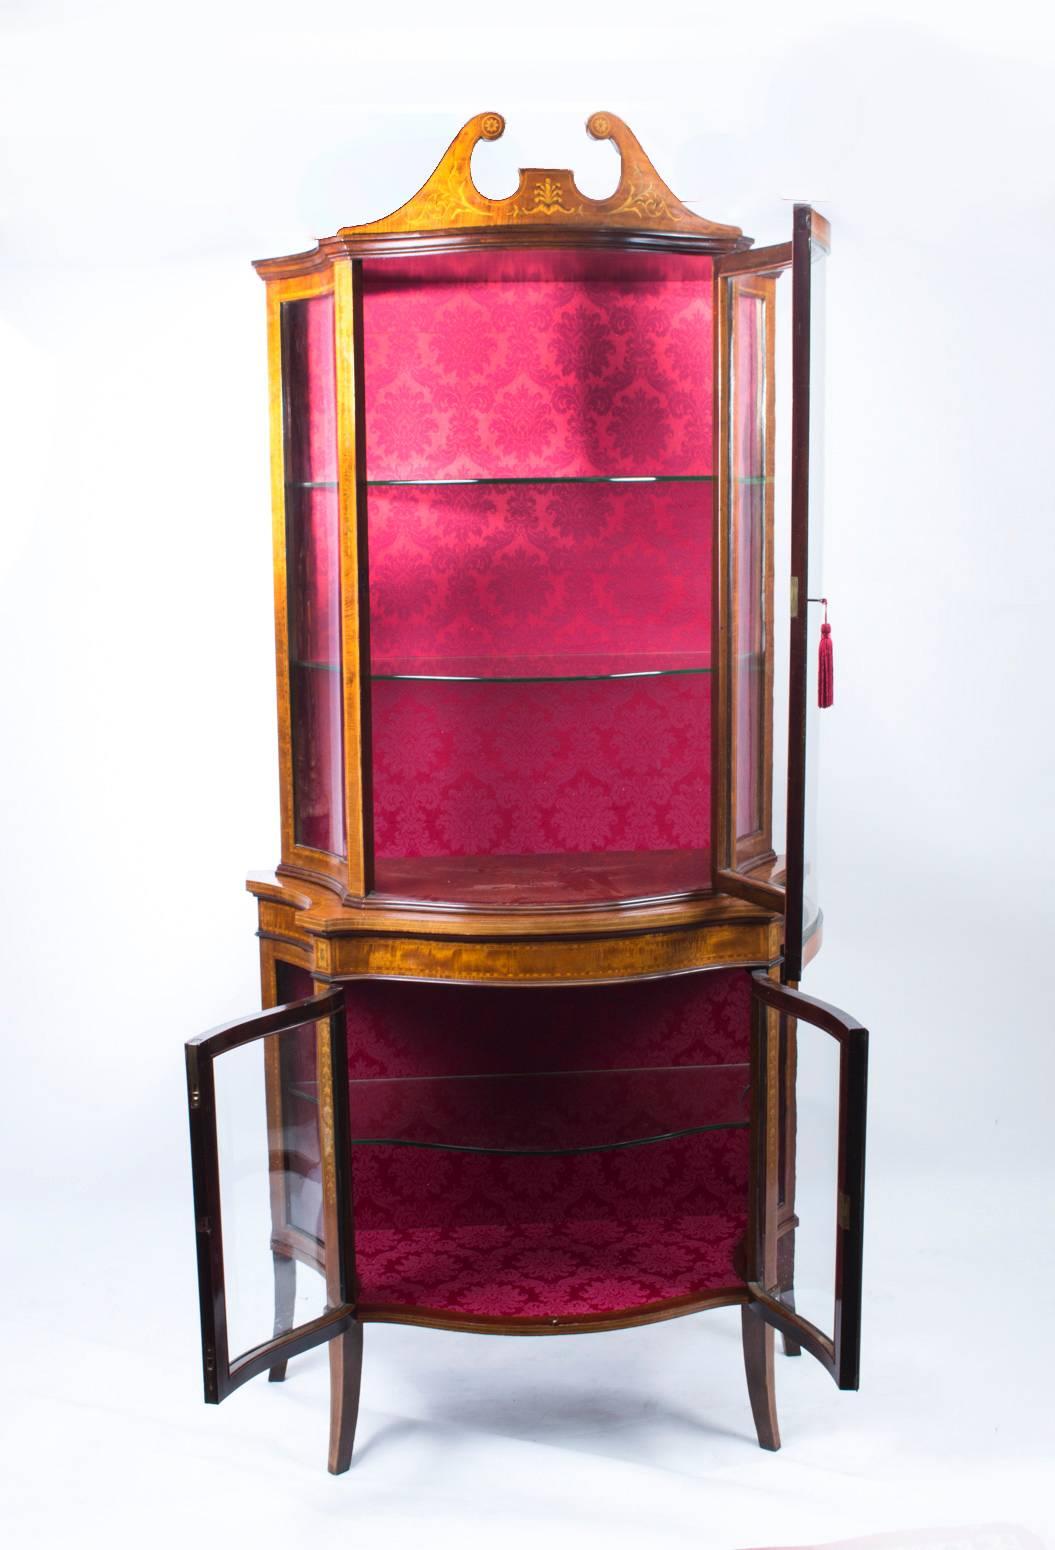 This is a stunning English Edwardian serpentine mahogany display cabinet, circa 1890 in date with exquisite hand cut inlaid decoration.

It has a glazed door above a pair of glazed doors, opening to a red damask lined interior with glass